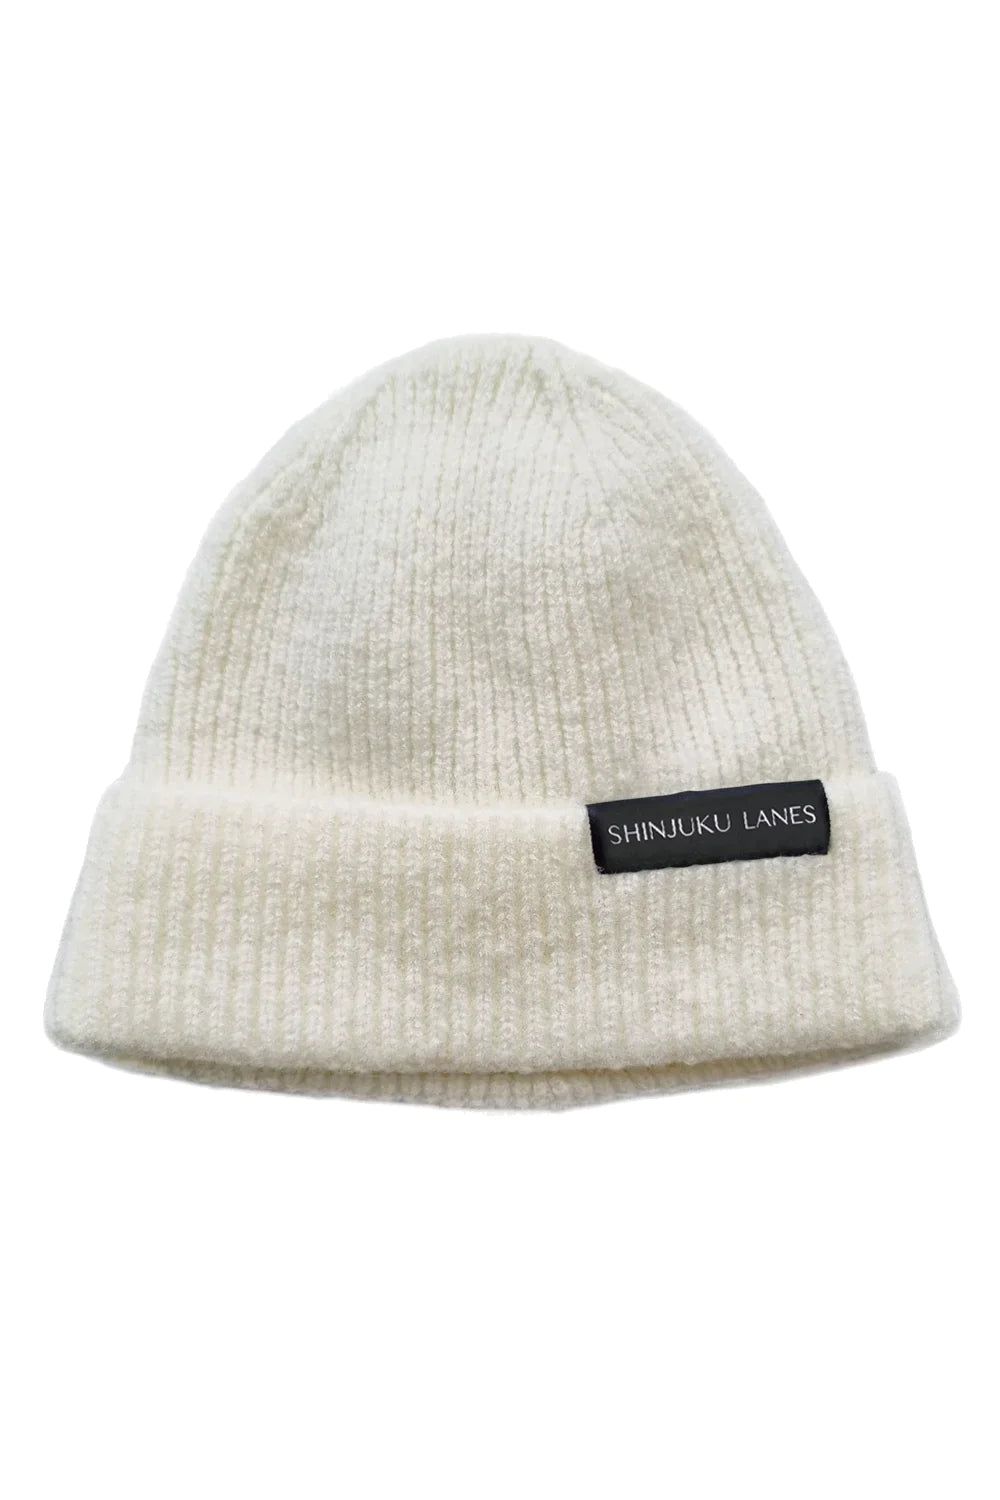 Product picture of Origin Ribbed Beanie - Ivory